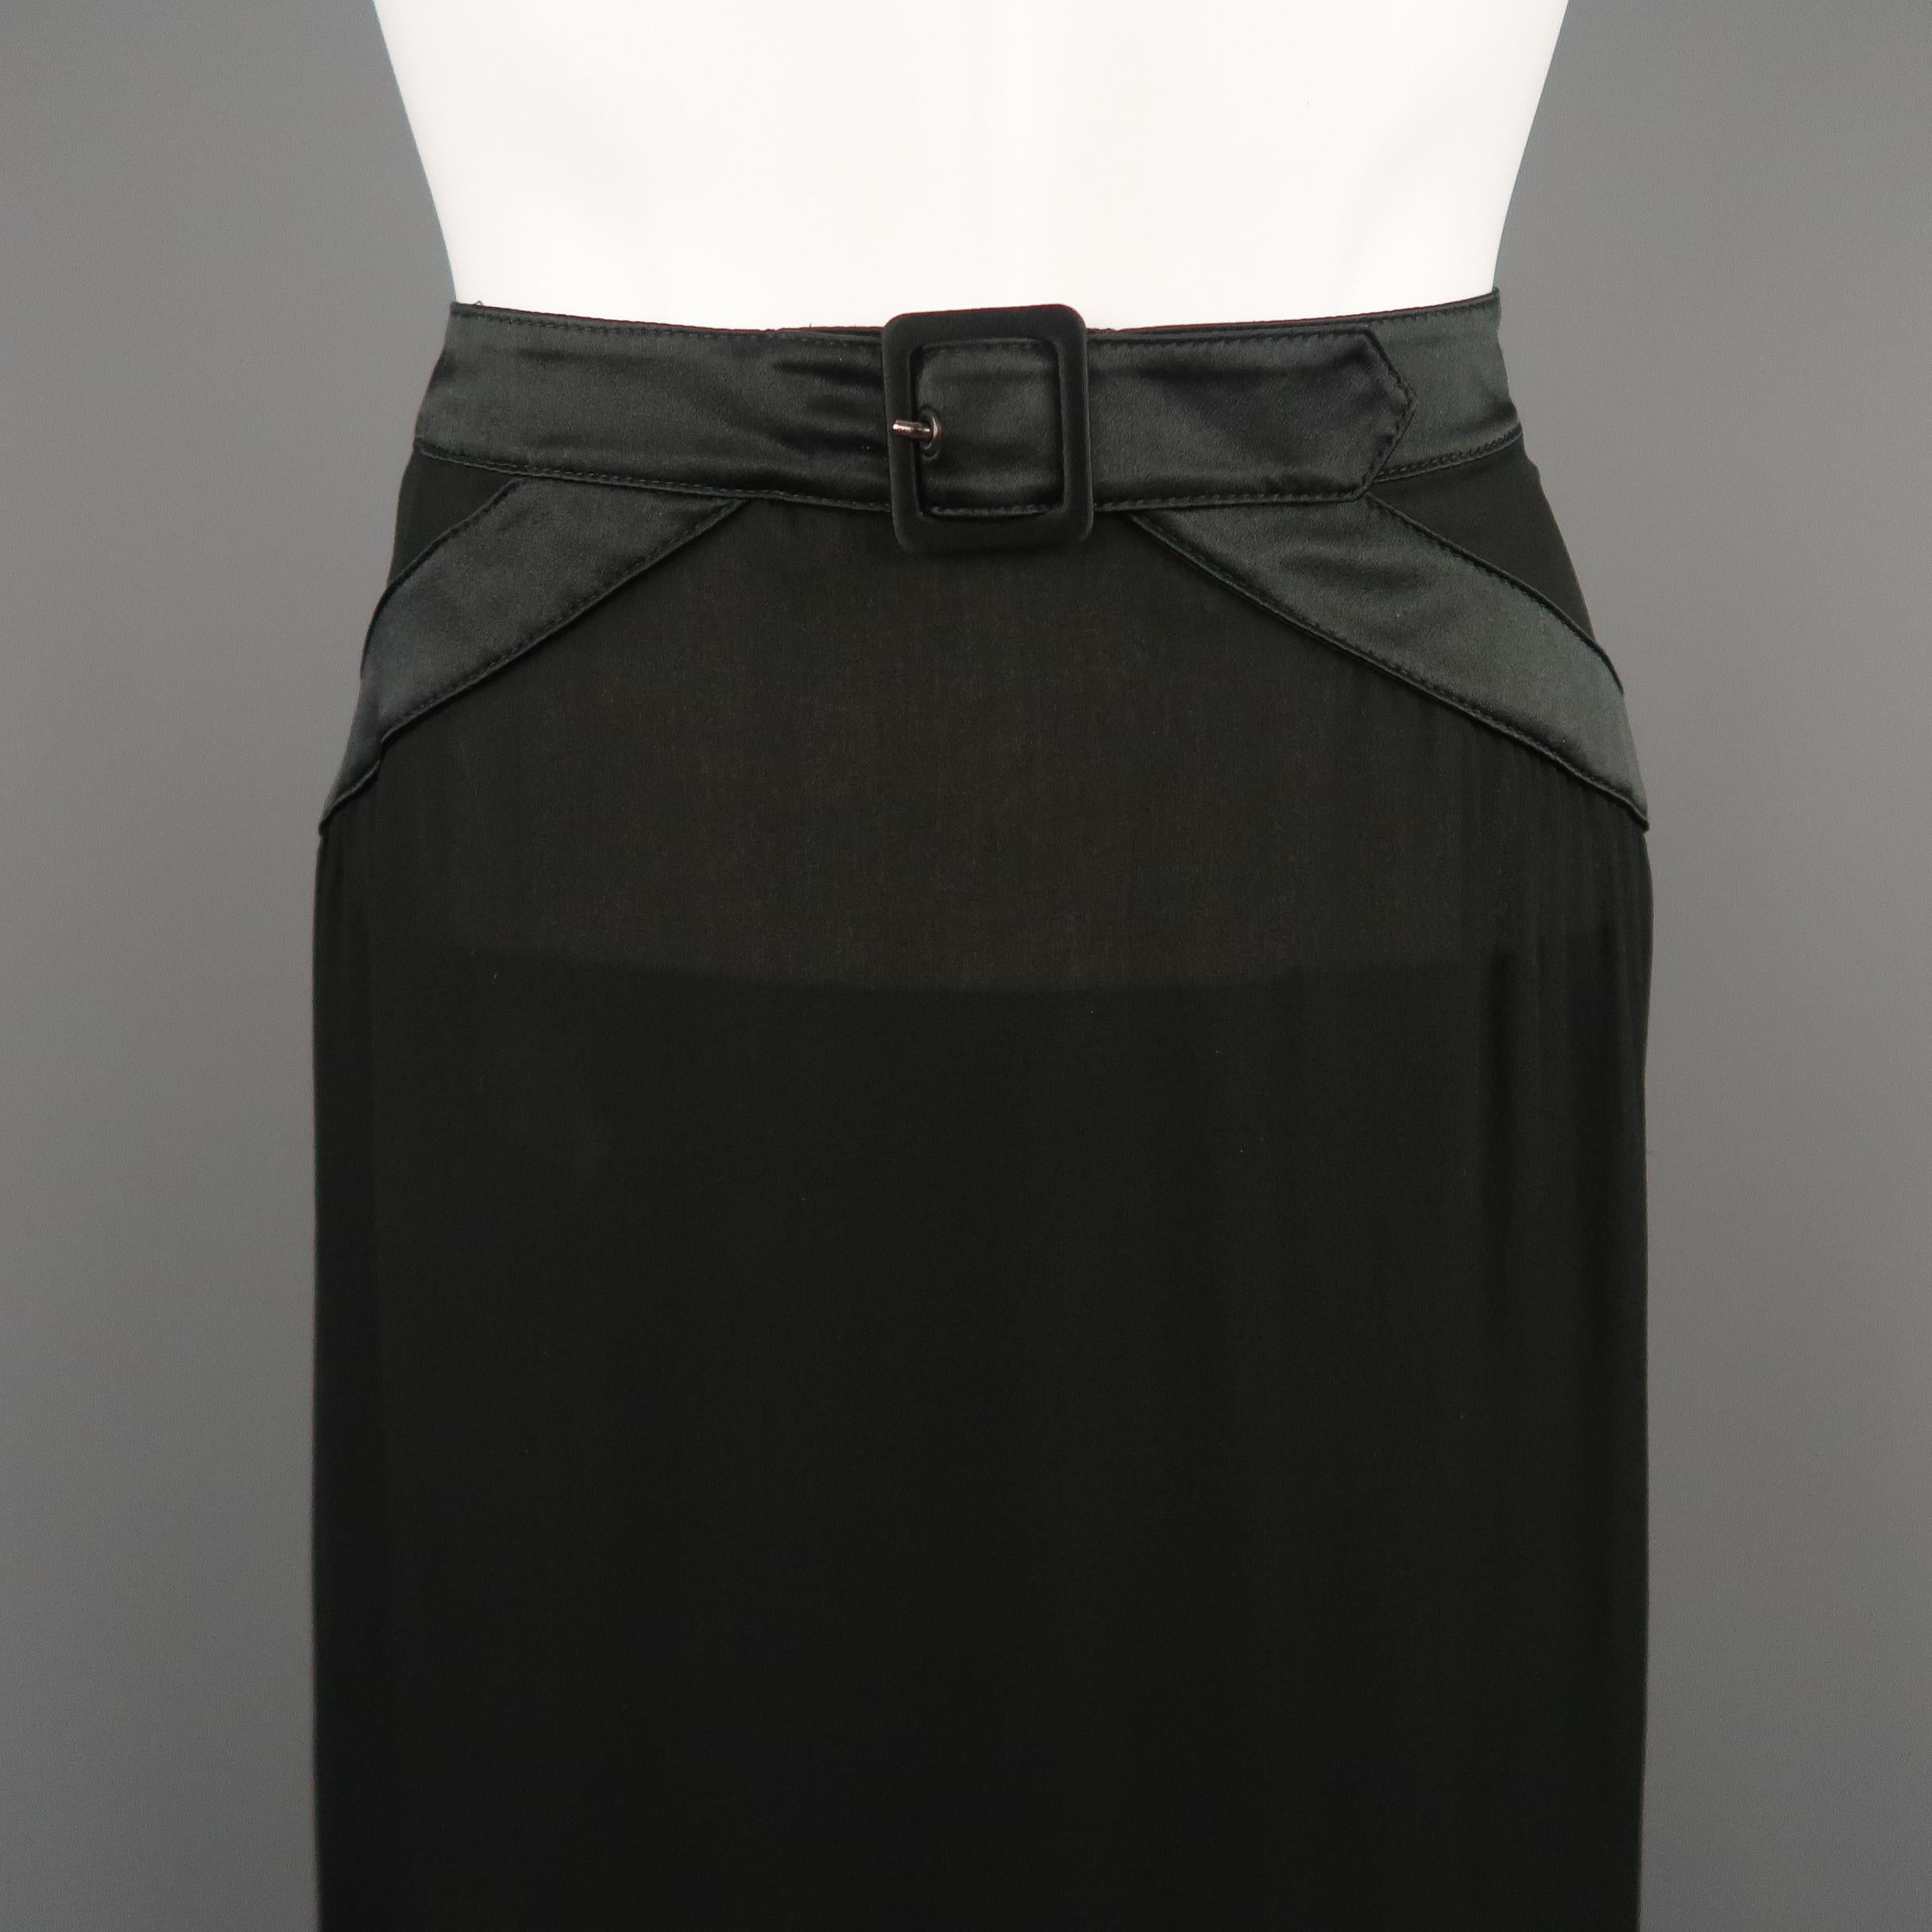 VALENTINO maxi skirt comes in layered sheer silk chiffon with a satin detailed belt waistband and slit side A line silhouette. Made in Italy.
 
Very Good Pre-Owned Condition.
Marked: 8
 
Measurements:
 
Waist: 31 in.
Hip: 48 in.
Length: 42 in.